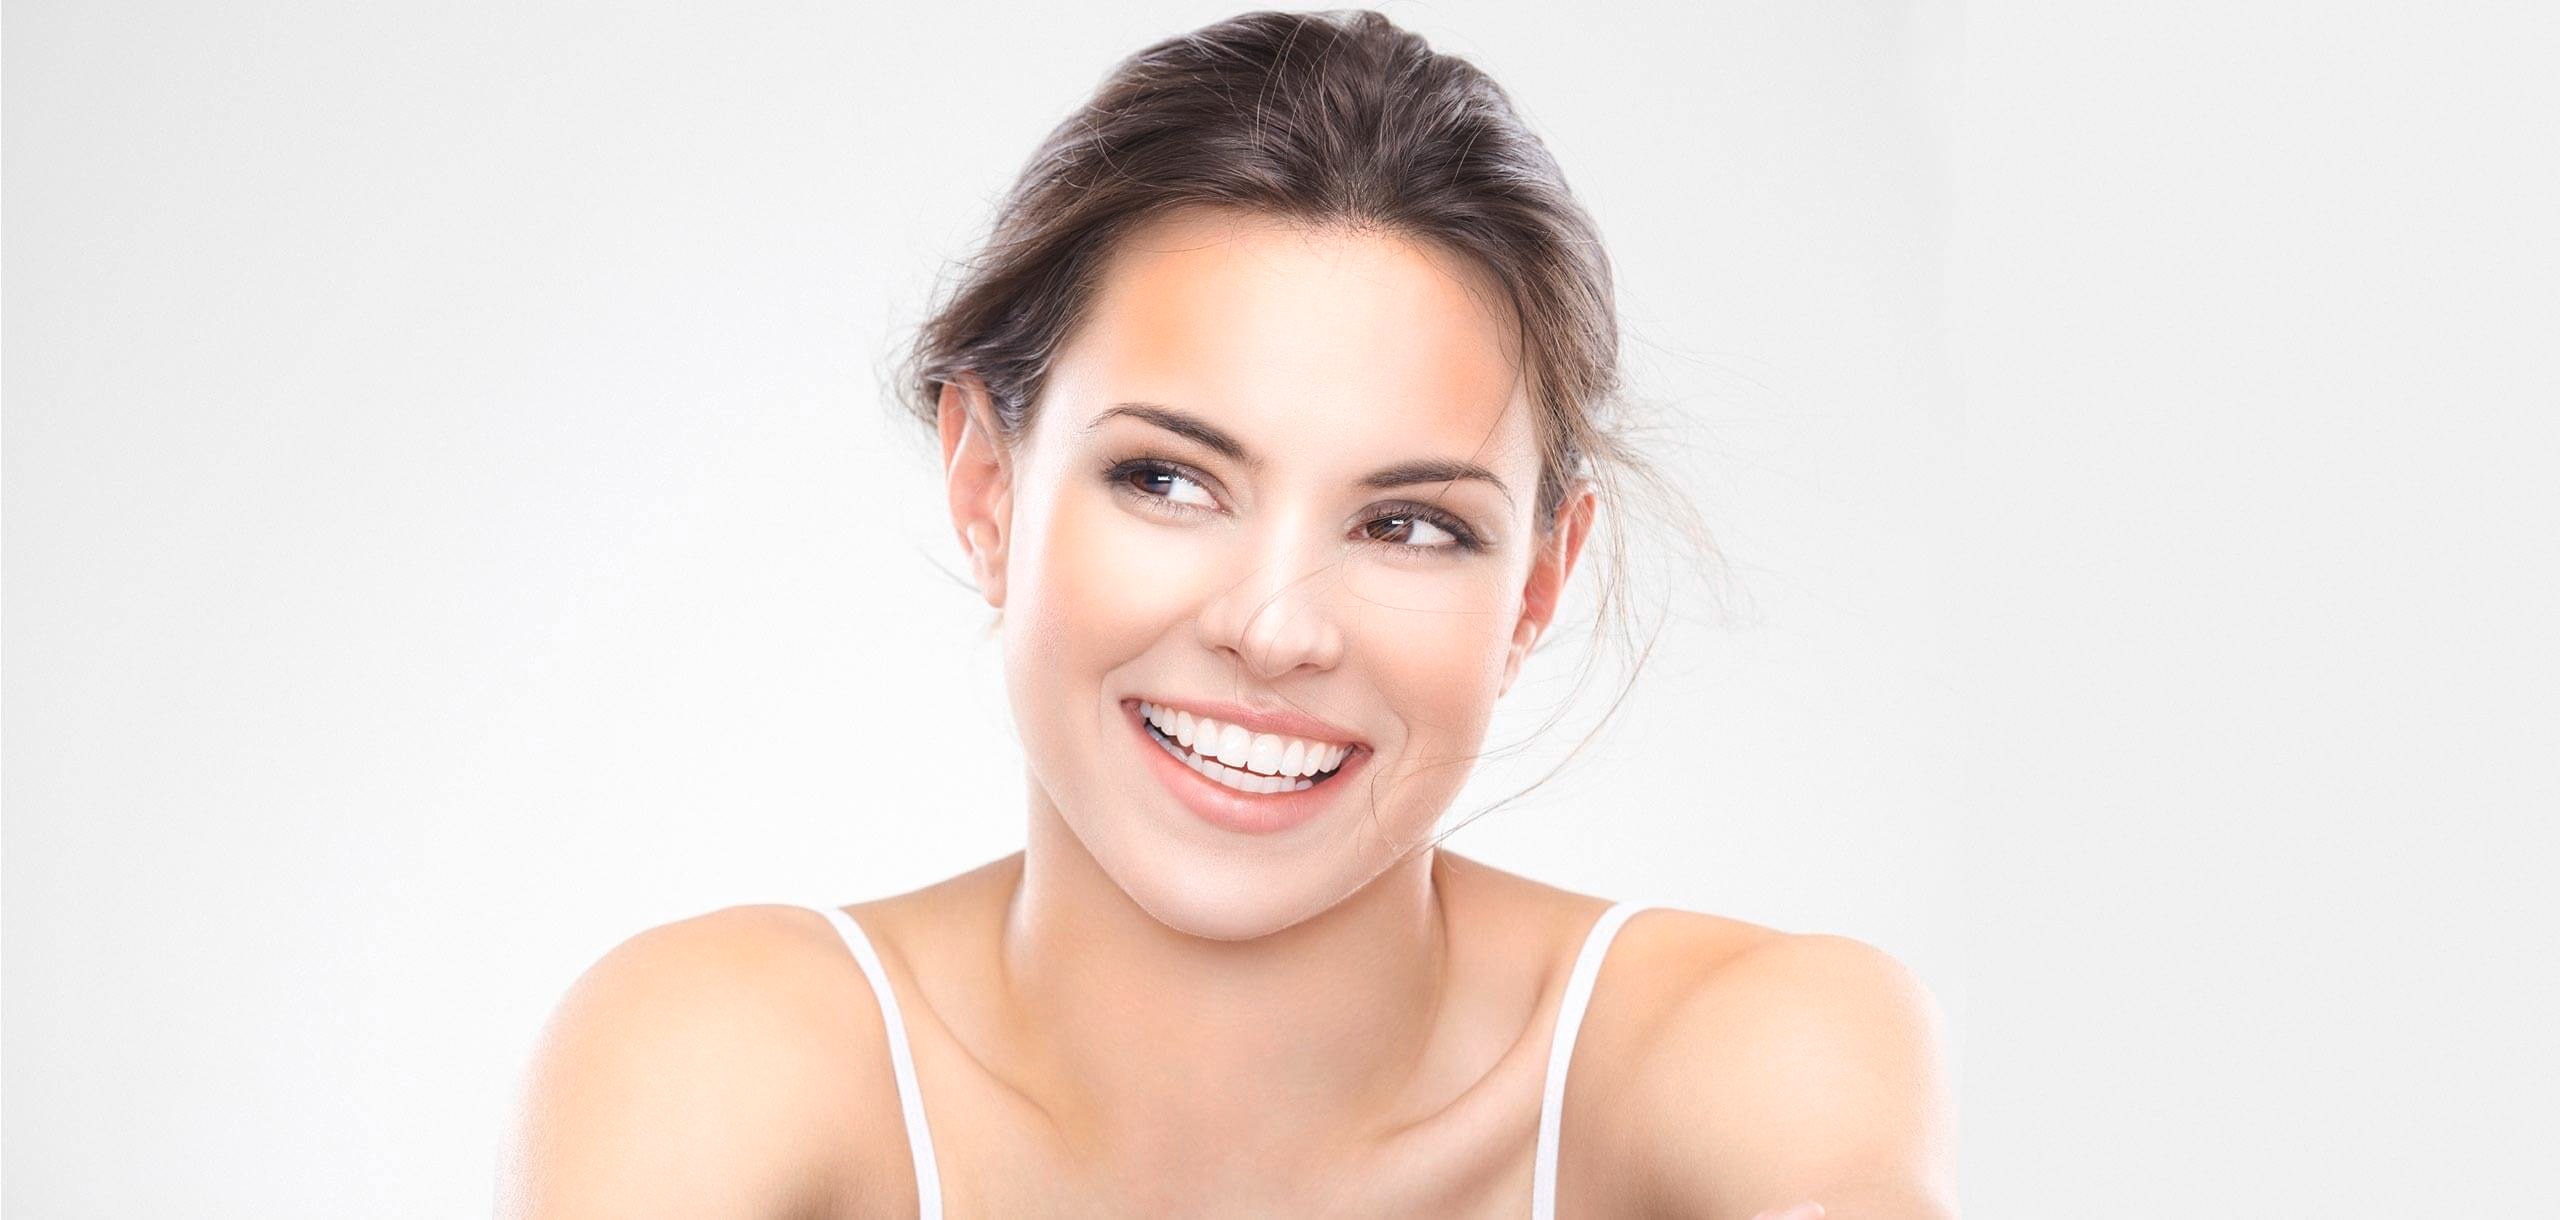 4 NEED TO KNOW BEAUTY TIPS THAT CAN BRIGTHEN YOUR SMILE